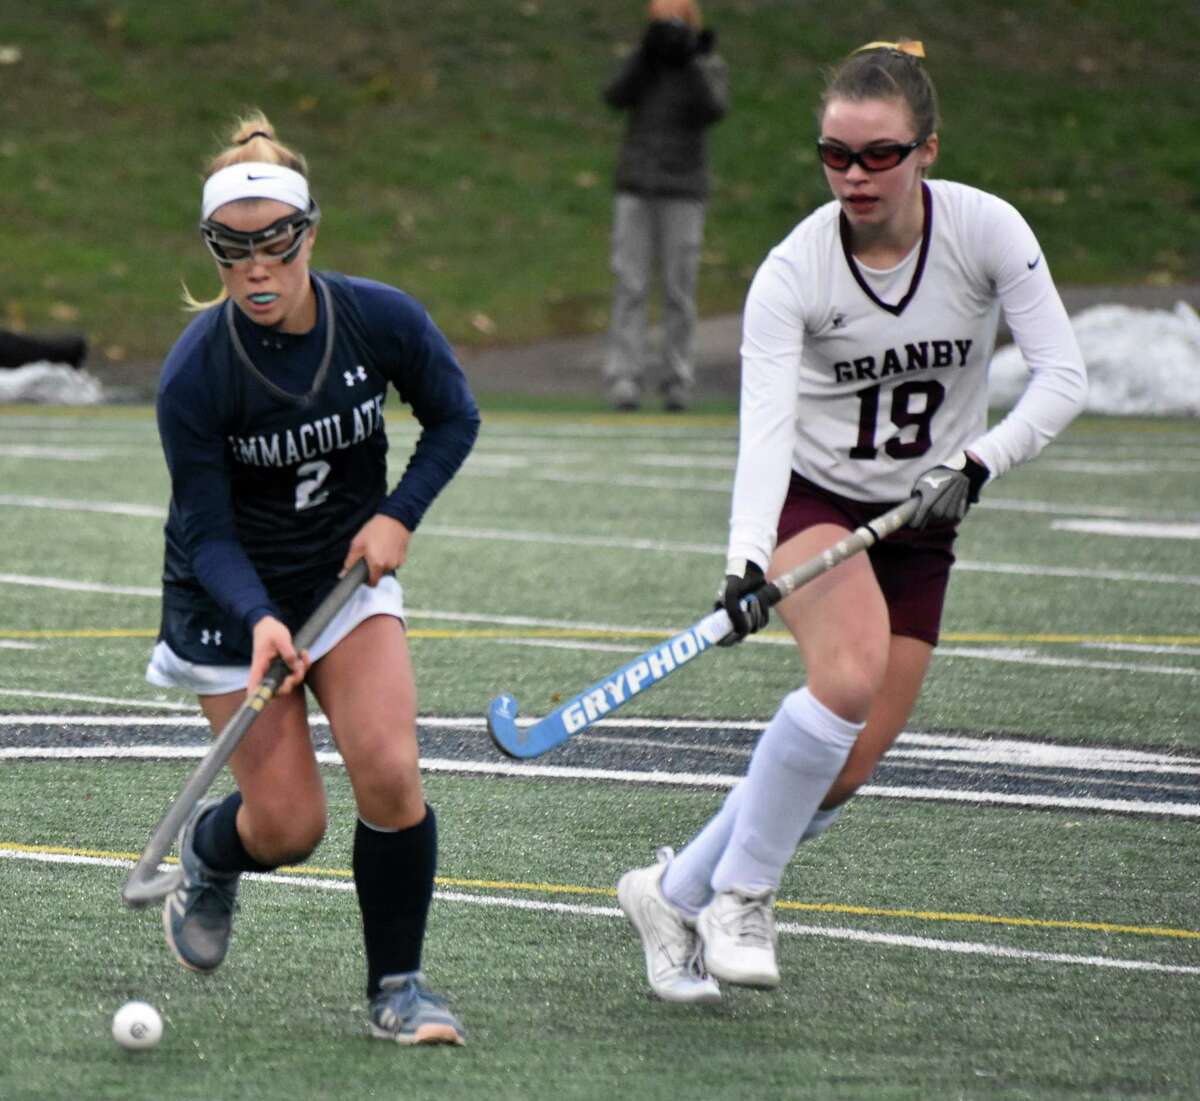 Action from the Class M field state championship between Granby and Immaculate at Wethersfield high school on Sunday, November 18, 2018. (Pete Paguaga, Heart Connecticut Media)